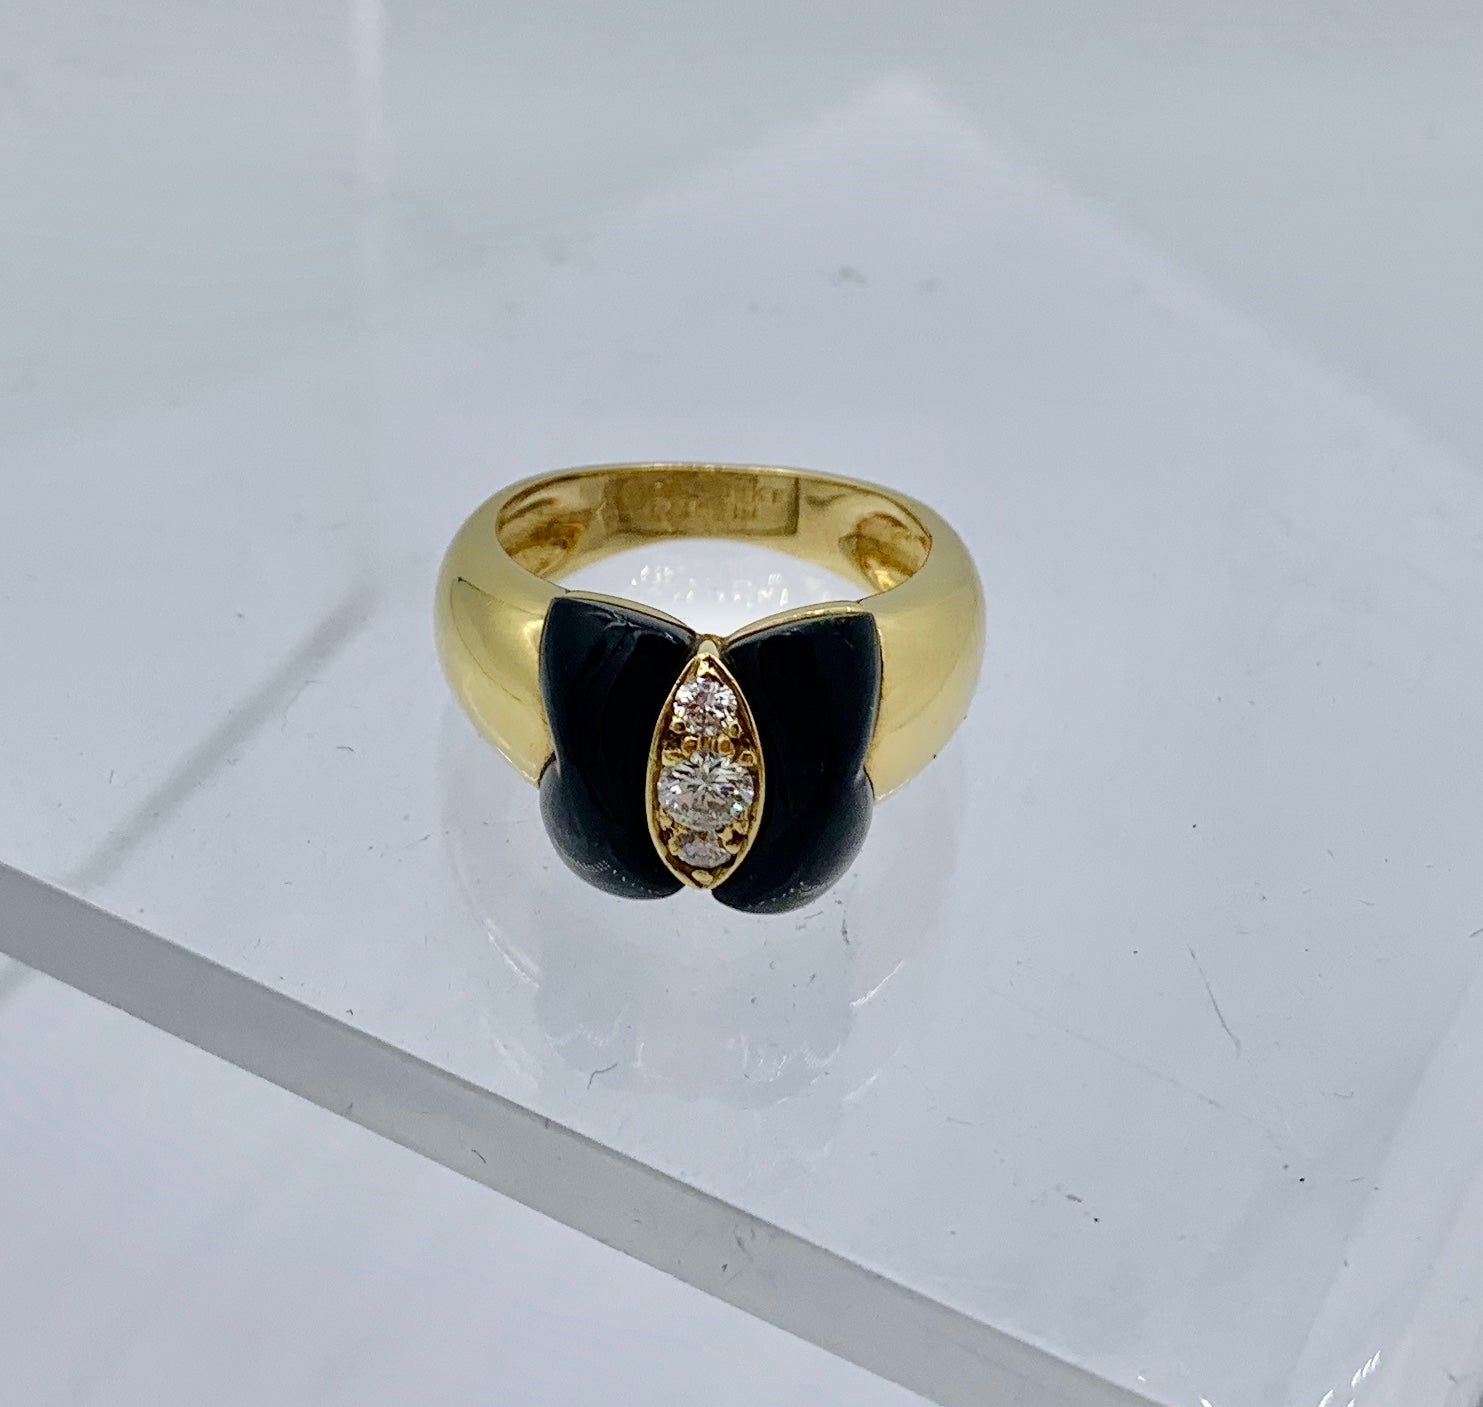 This is a stunning ring by Van Cleef & Arpels with three Diamonds, Black Onyx and 18 Karat Gold.  The ring is made in 
France.  The classic elegant jewel is a vintage Van Cleef jewel with dramatic black and white design that evokes the natural form